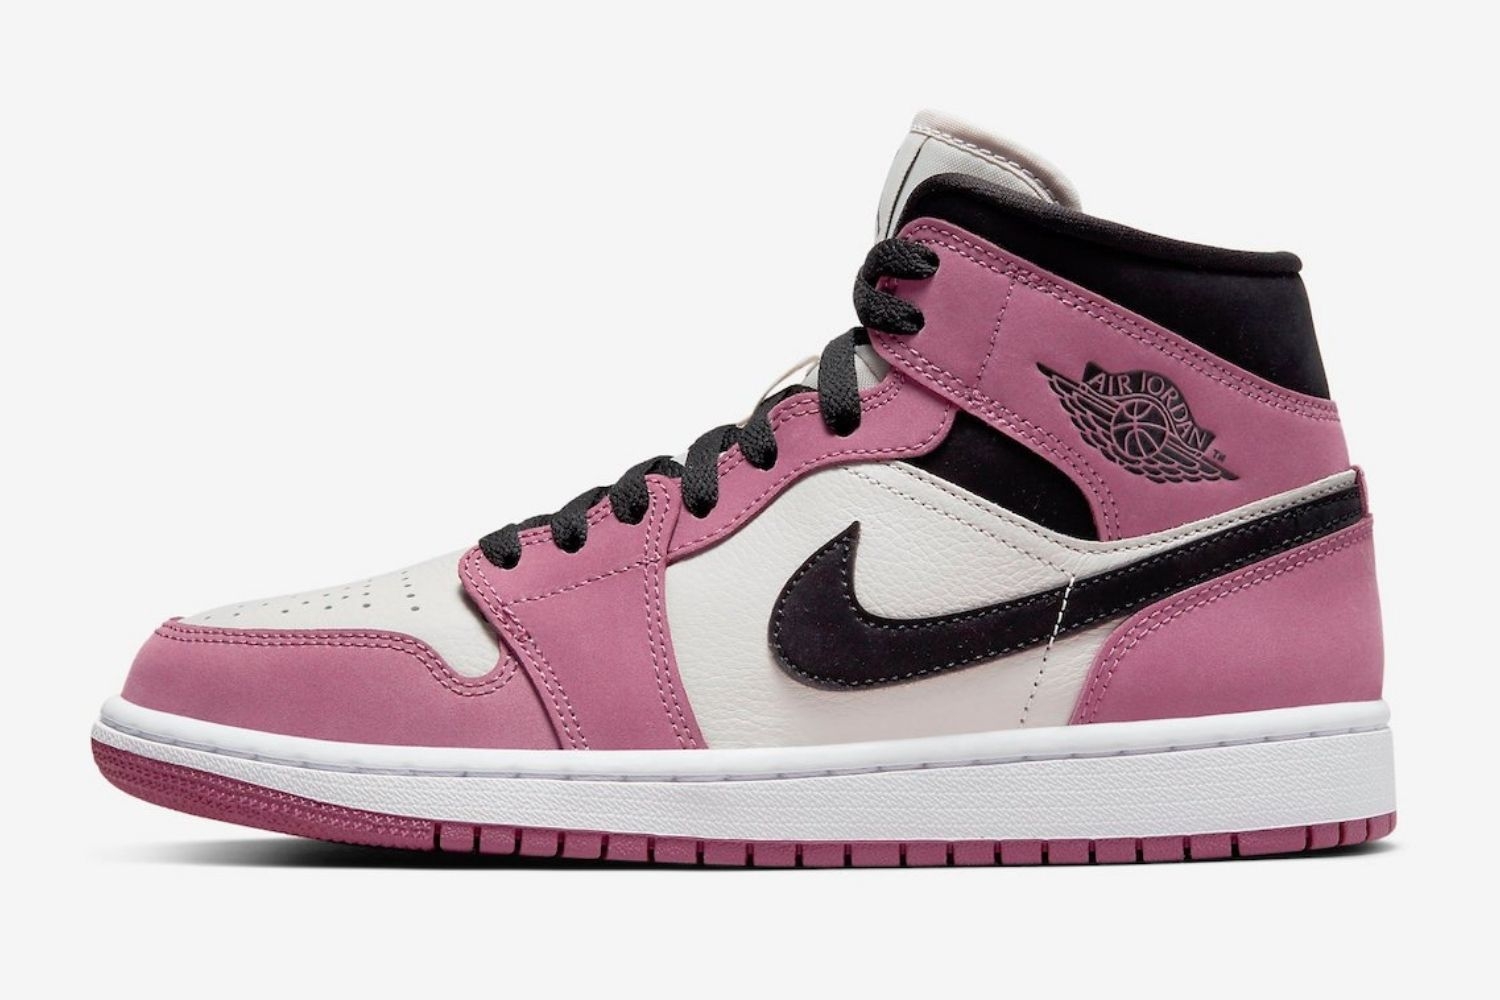 The Air Jordan 1 Mid gets a 'Berry Pink' colorway